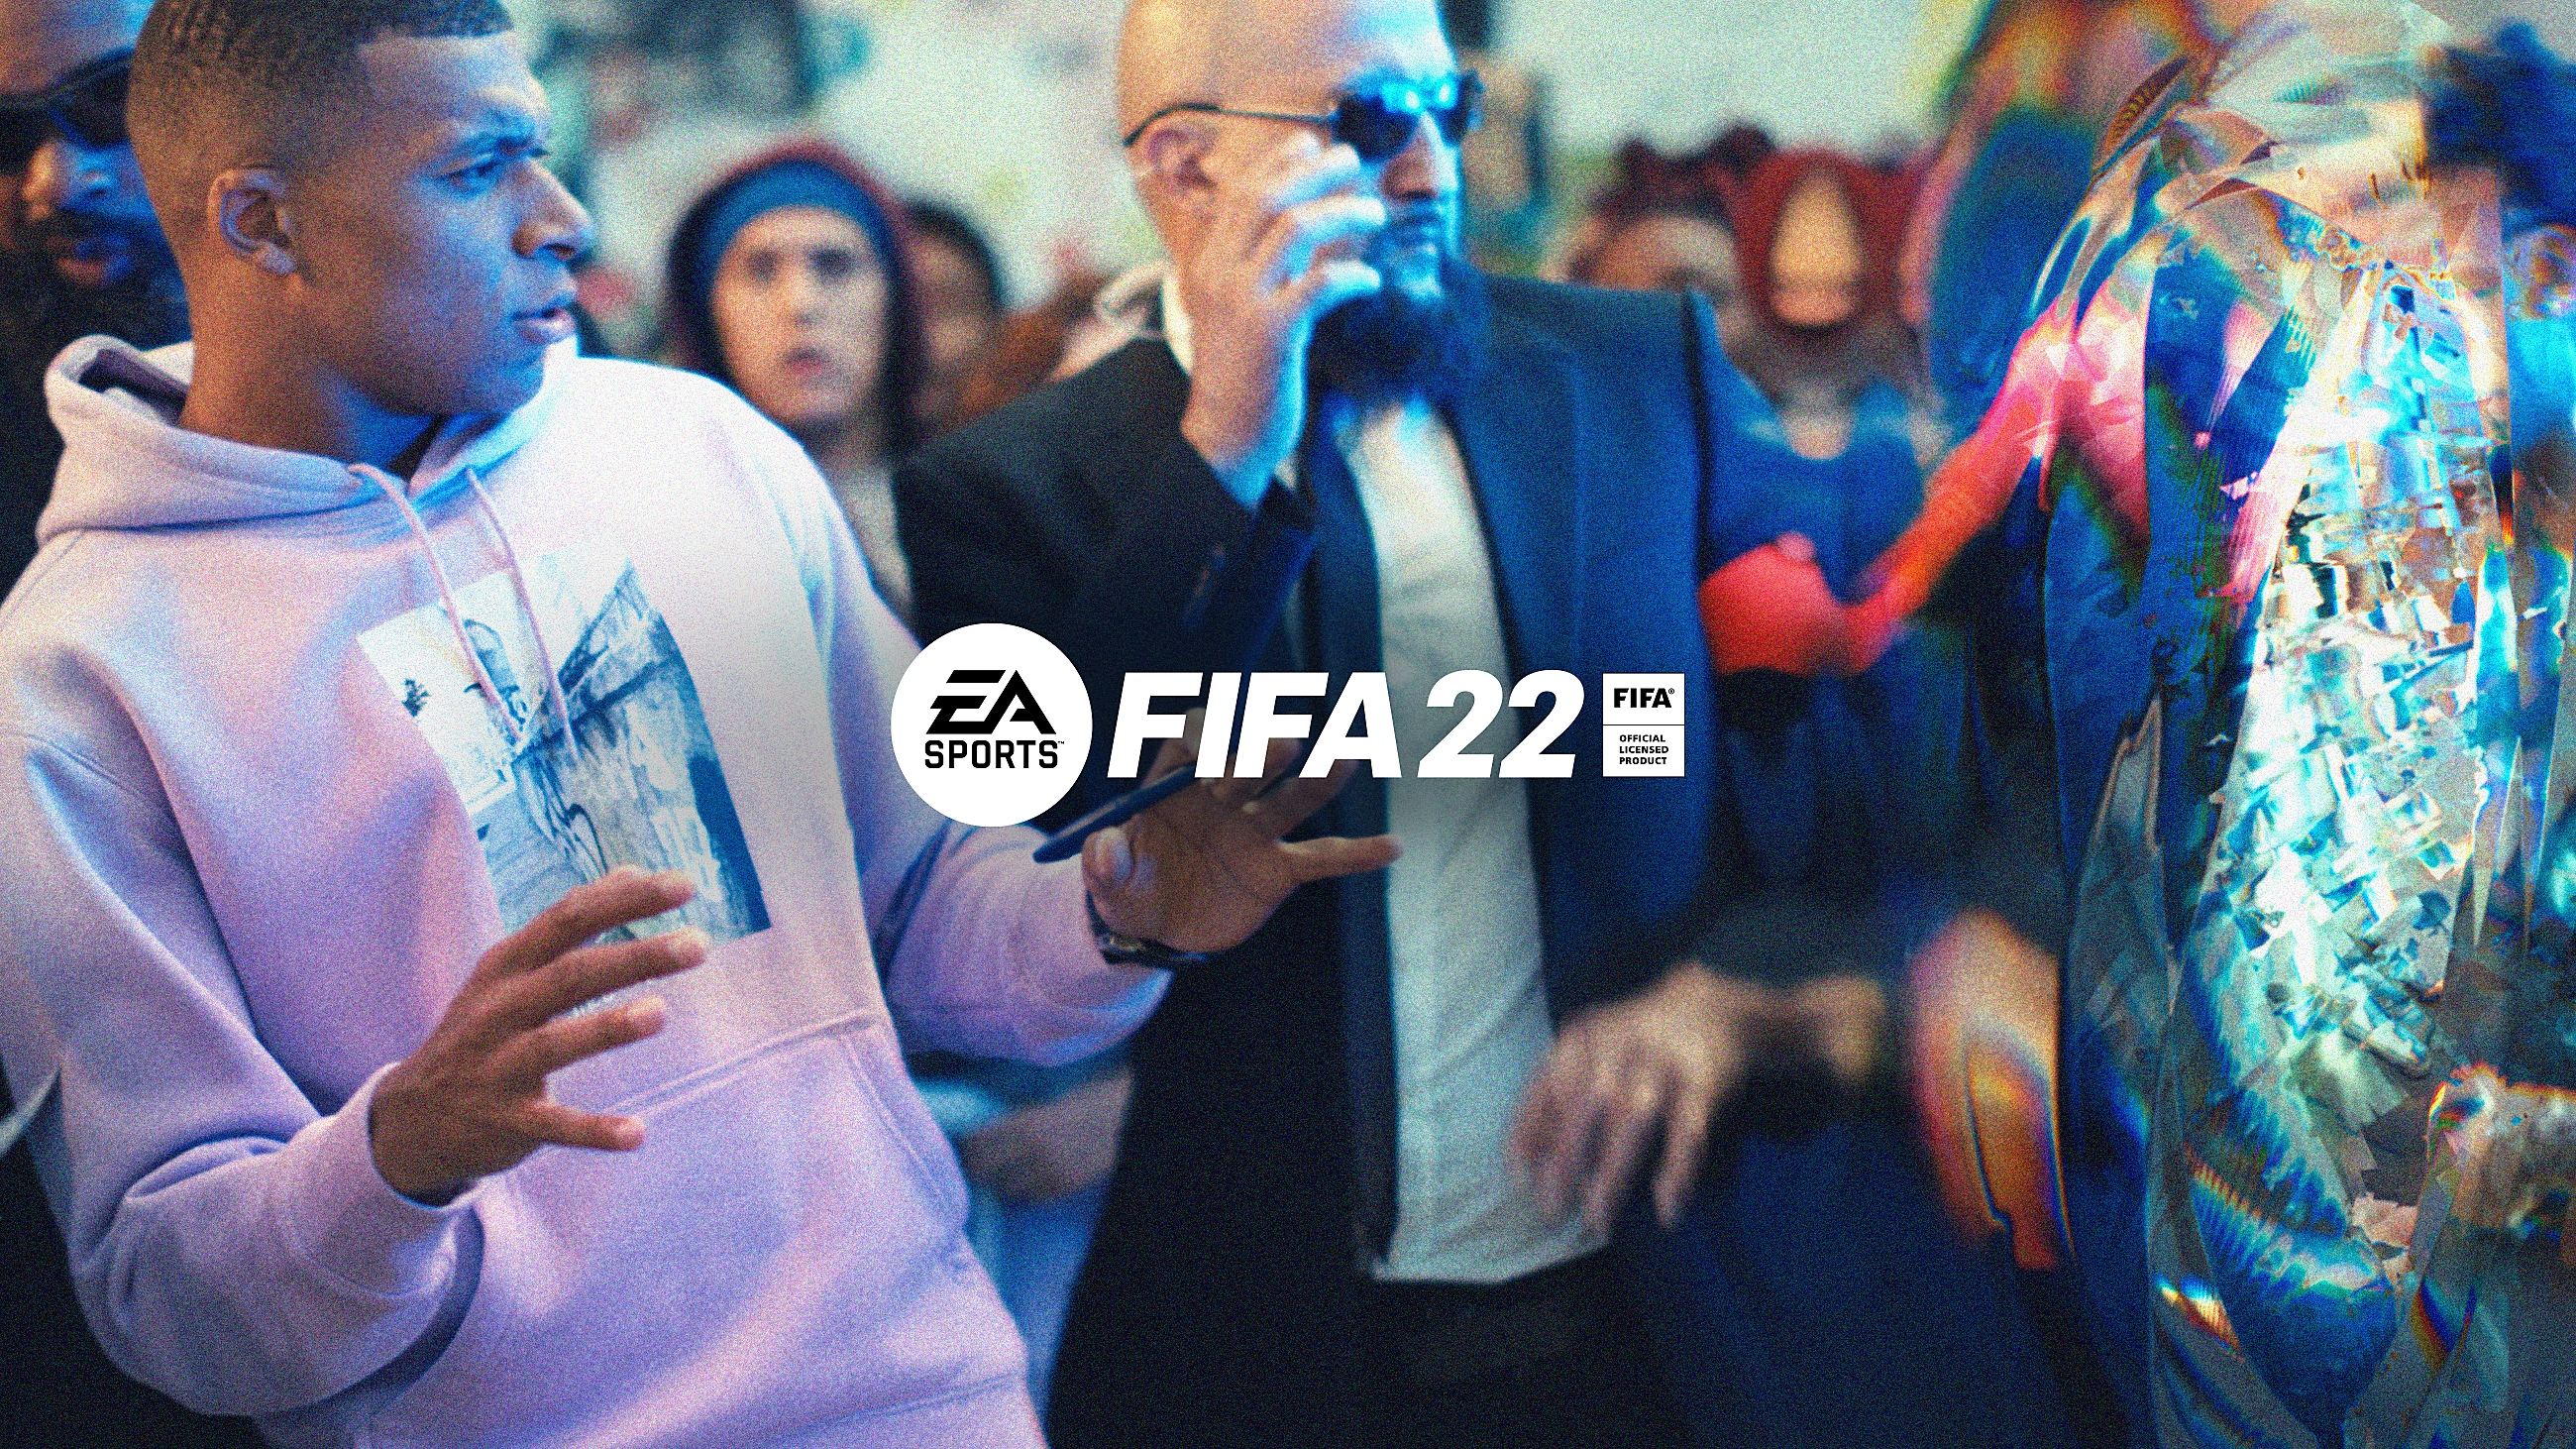 『FIFA 22』Powered by Football | 公式ローンチトレーラー